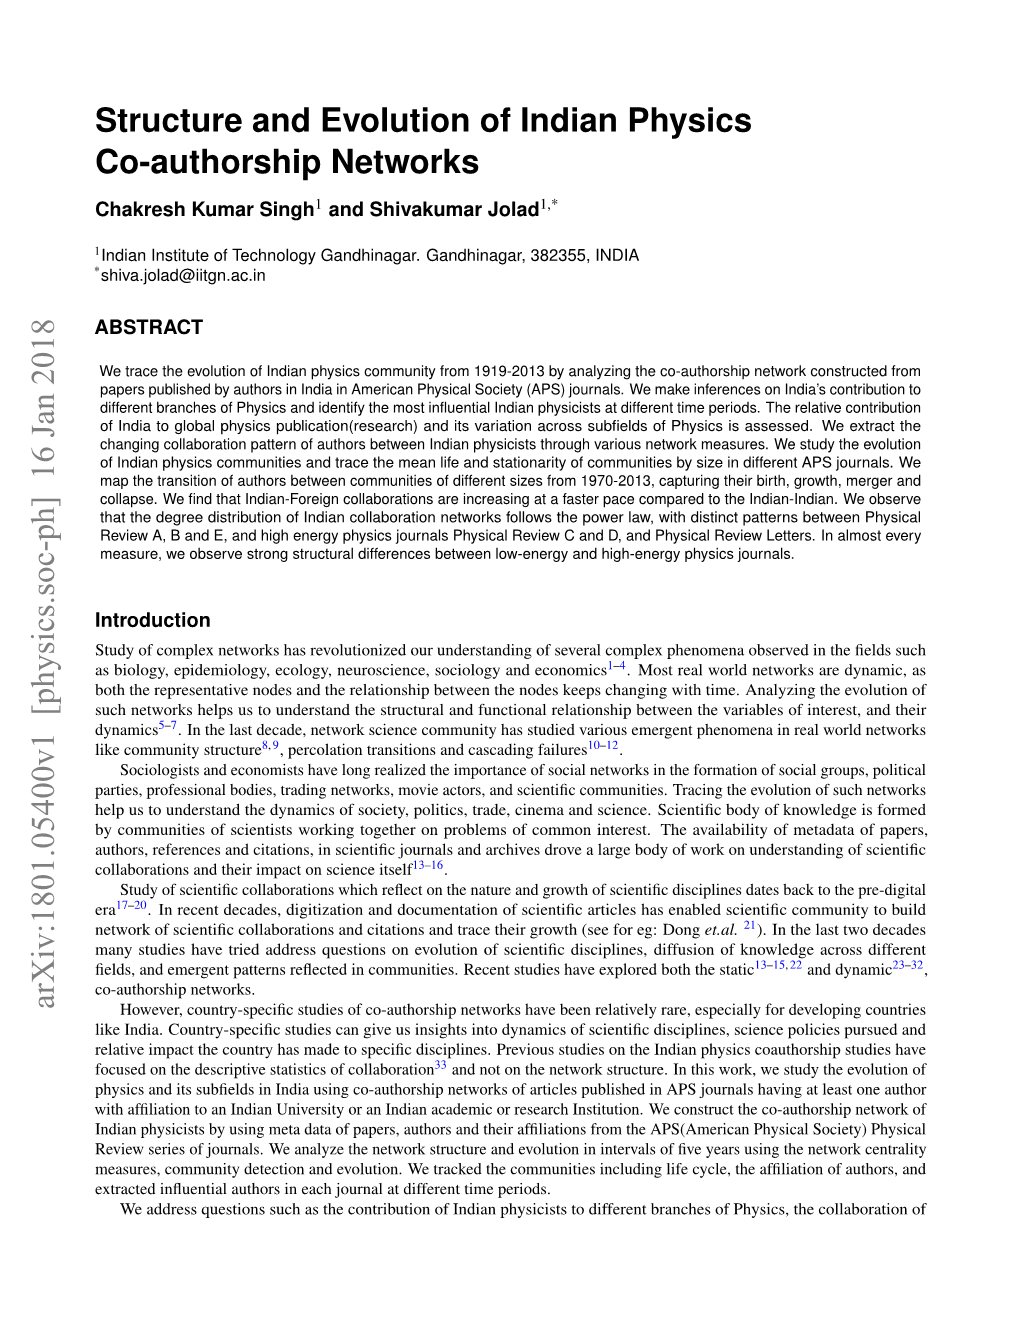 Structure and Evolution of Indian Physics Co-Authorship Networks